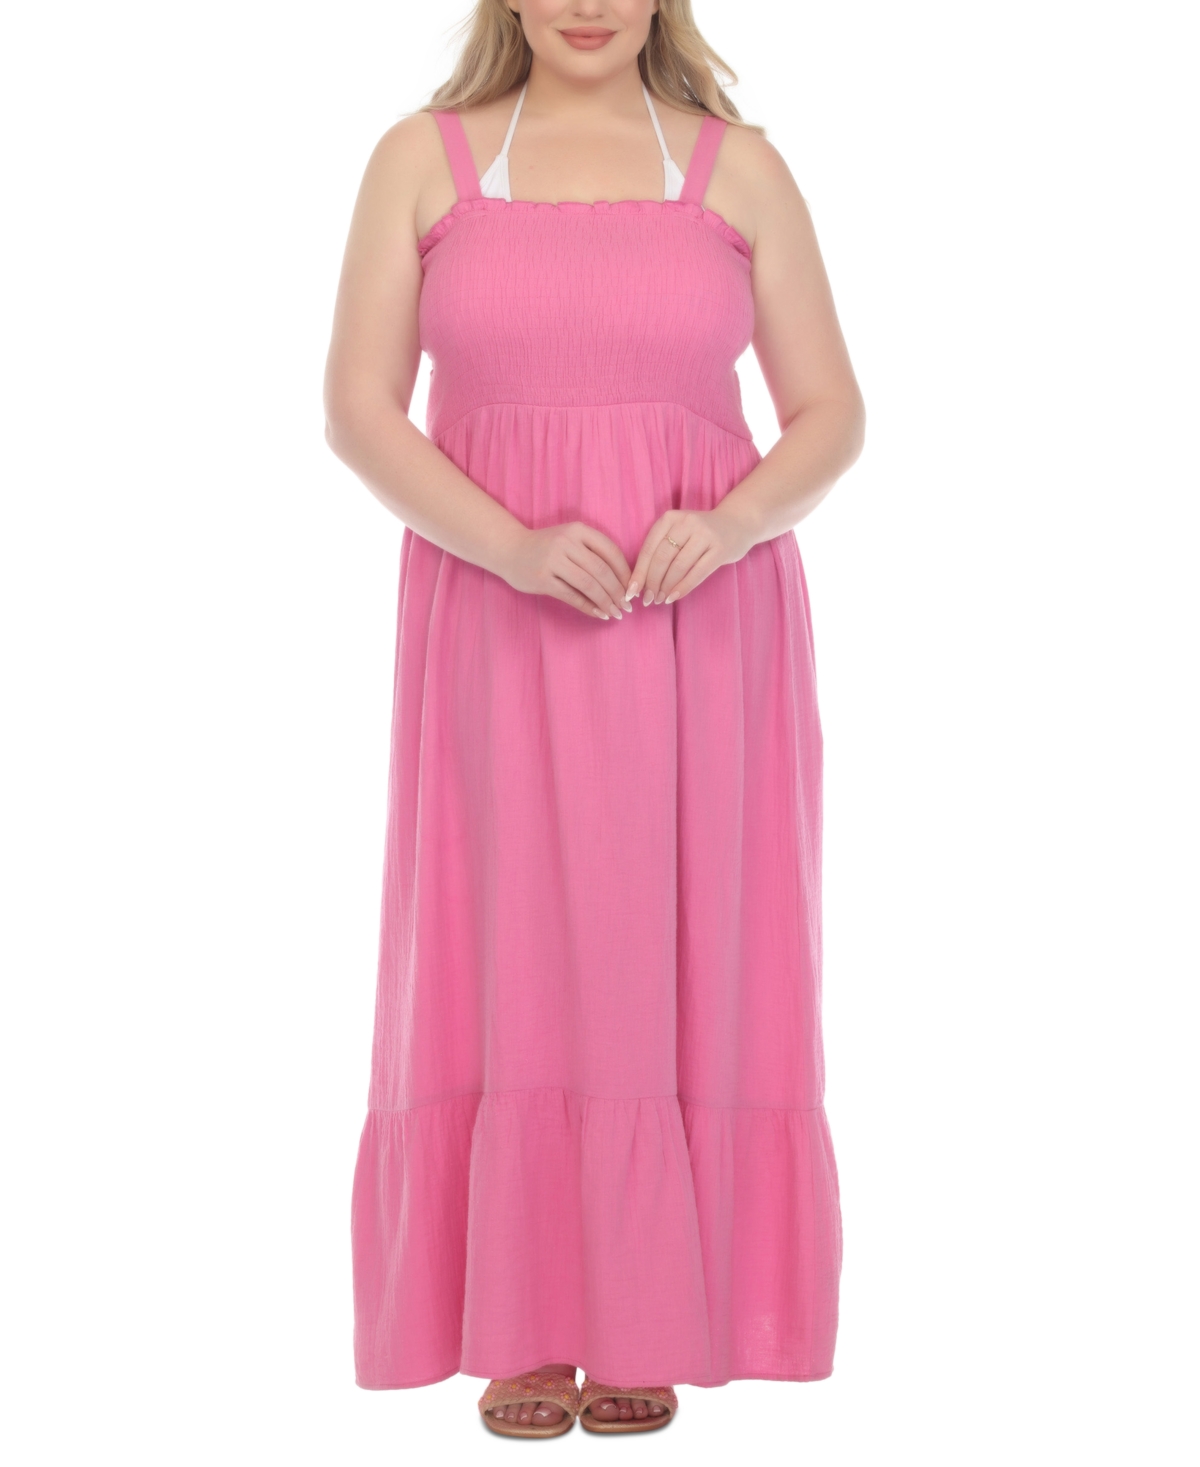 Plus Size Smocked Cotton Sleeveless Cover Up Maxi Dress - Pink Fizz